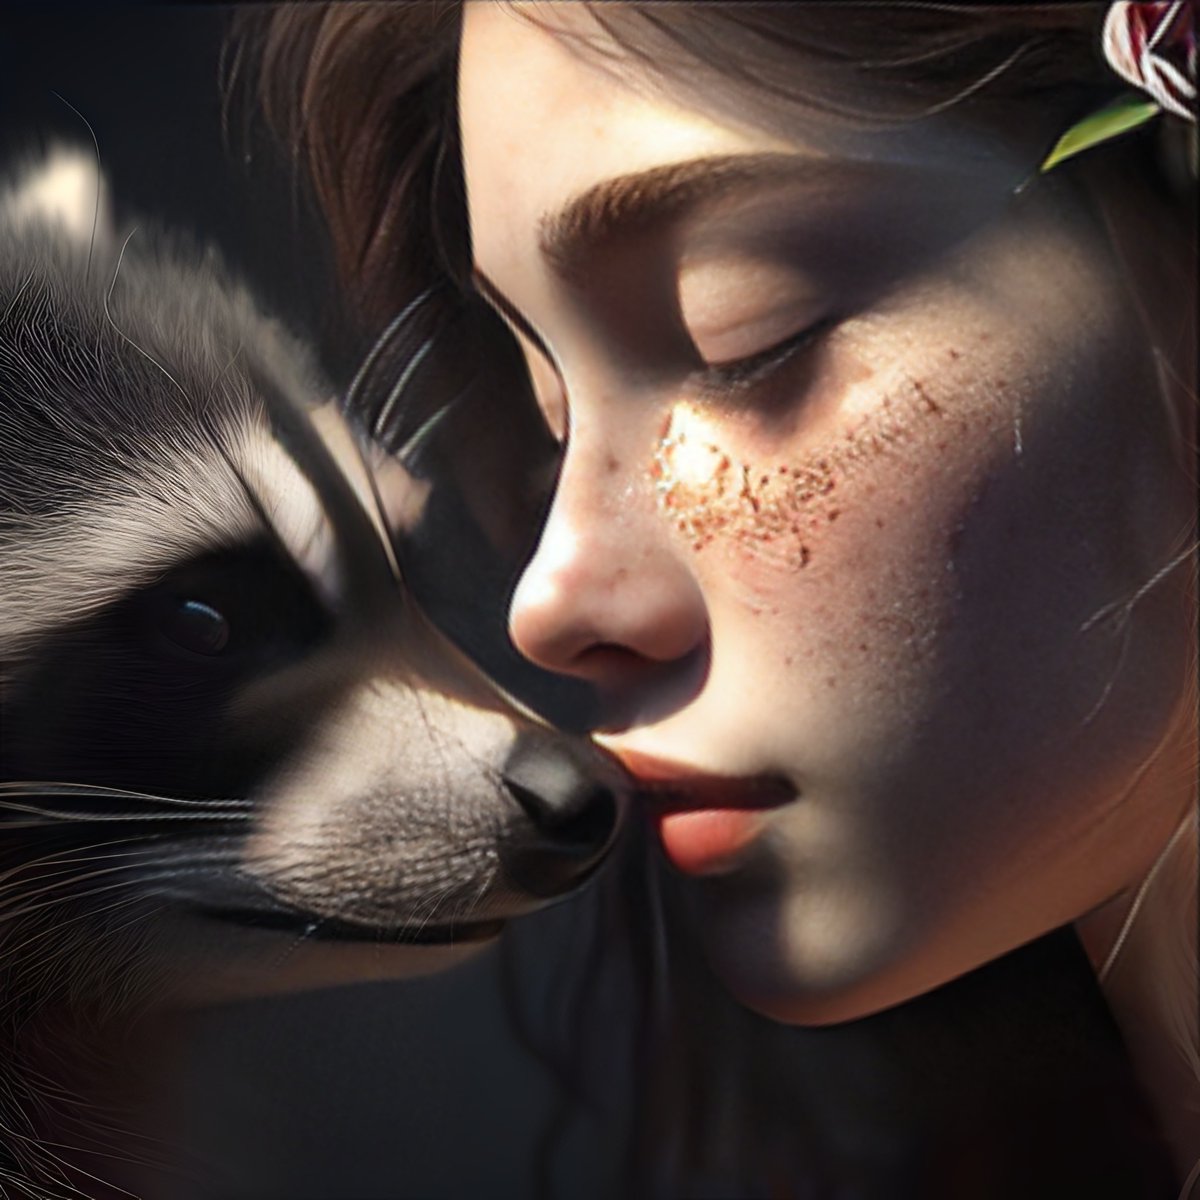 Sharing a special moment with my raccoon buddy 🦝✨ #IntimateConnections #NatureLovers Good night, sleep tight, and dream sweet dreams ✨💤 #SweetDreams #GoodNight